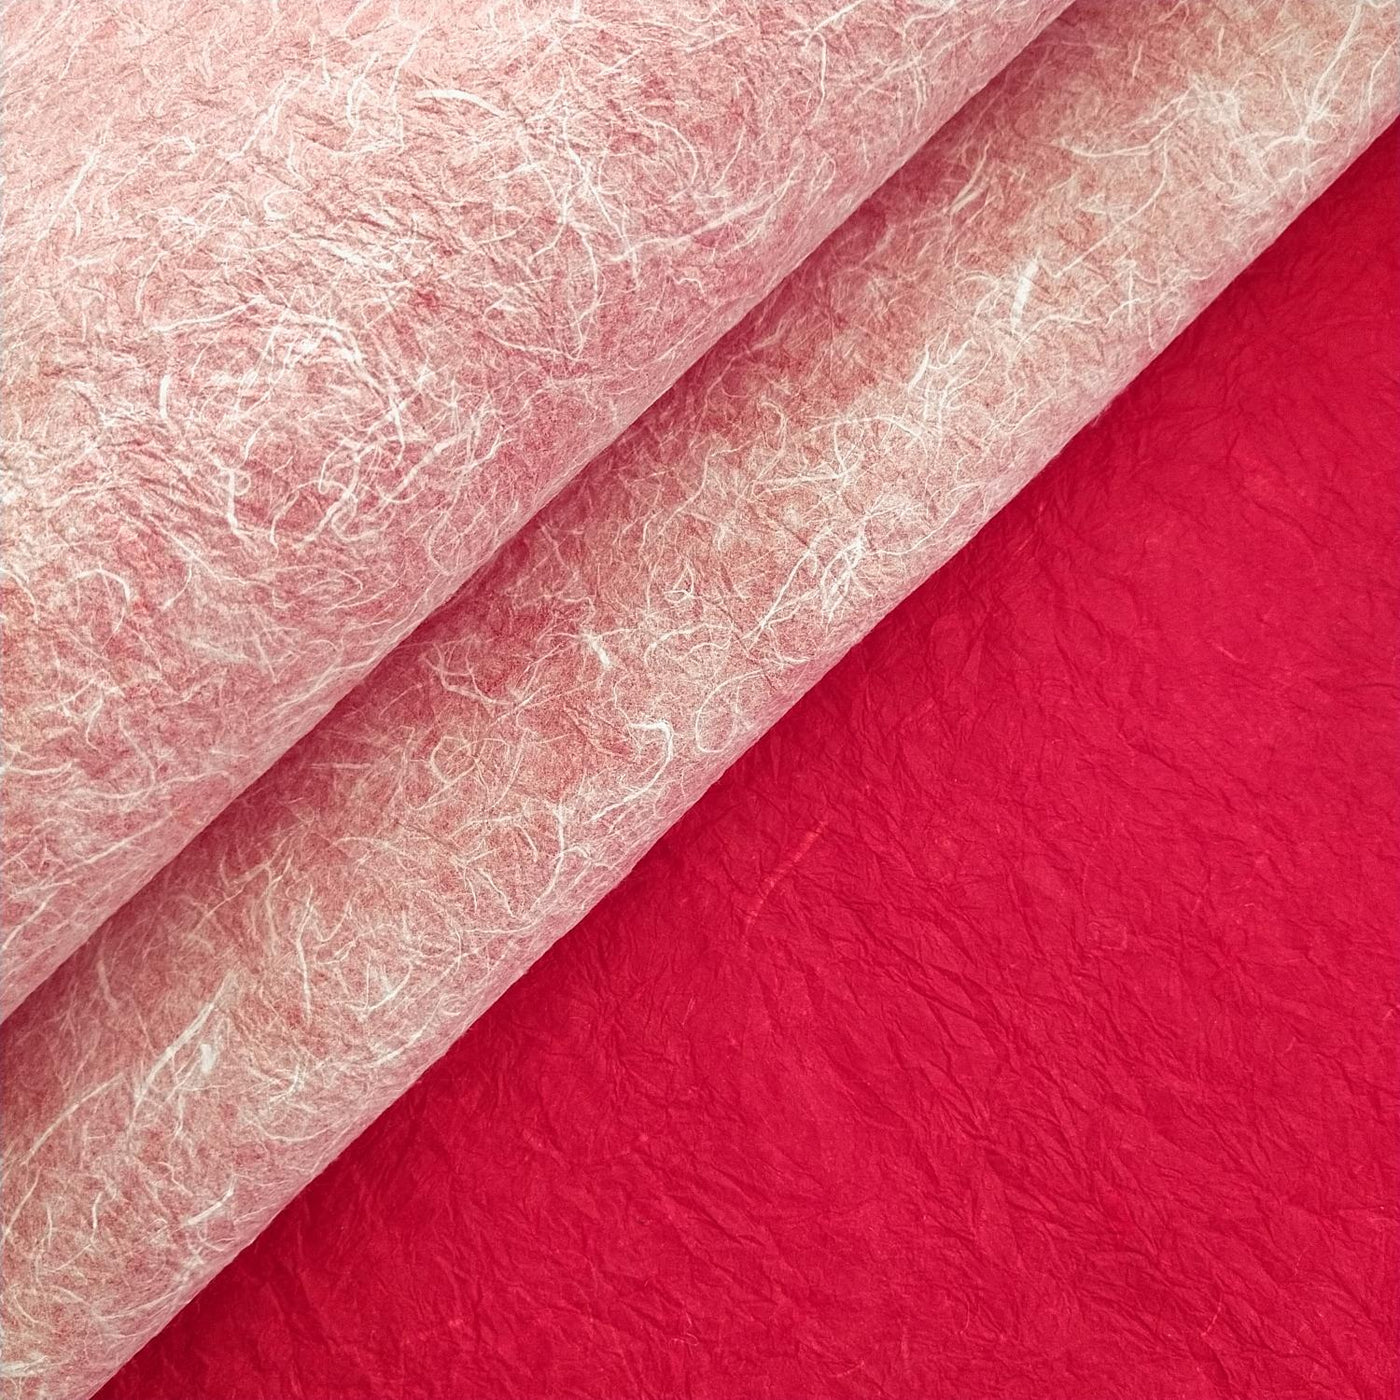 Double-sided Momigami Mulberry Paper (White and Red)